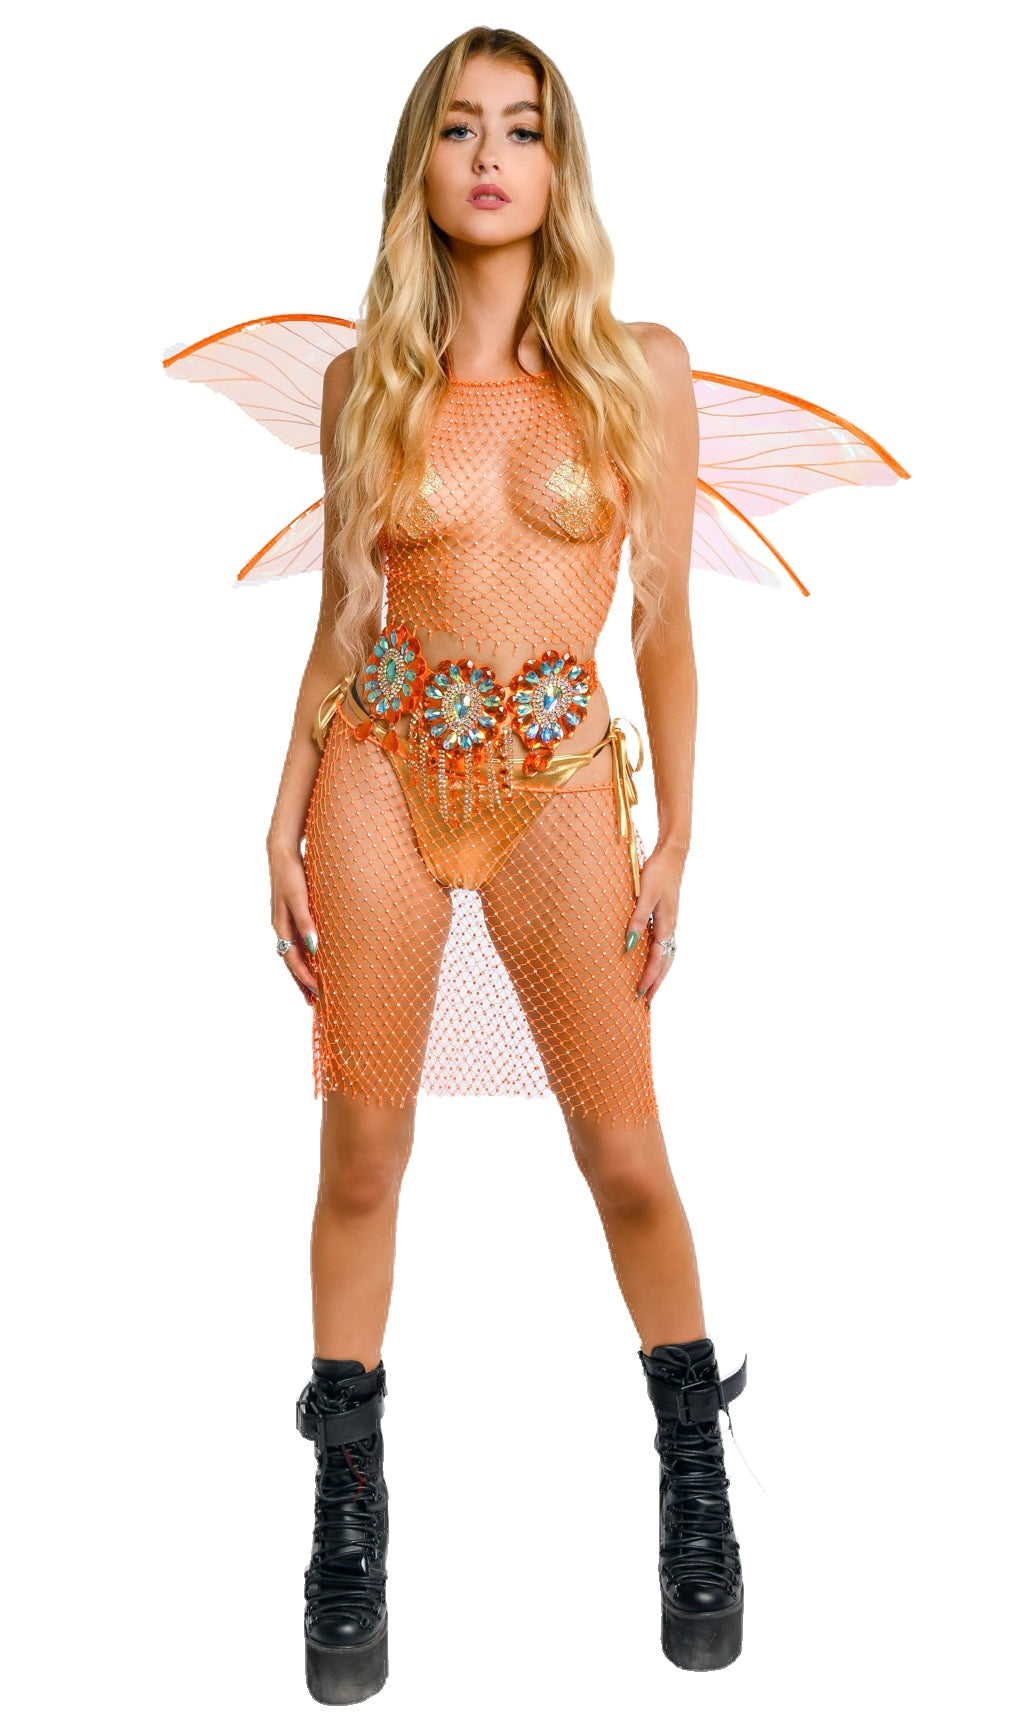 FULL OUTFIT- Stella Winx Fairy Costume